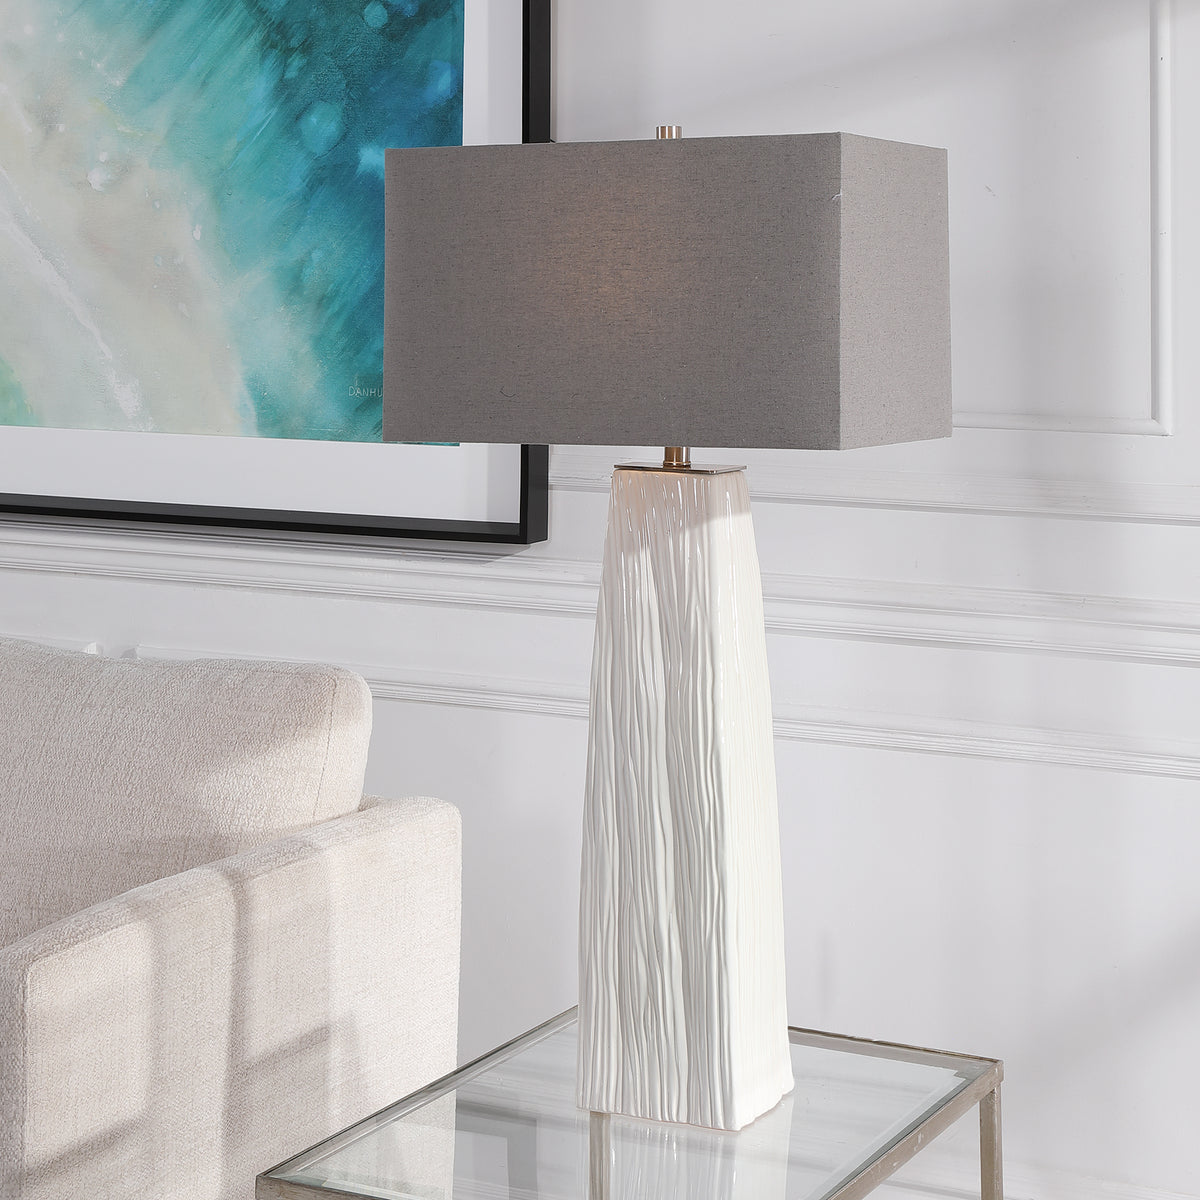 Sycamore White Table Lamp